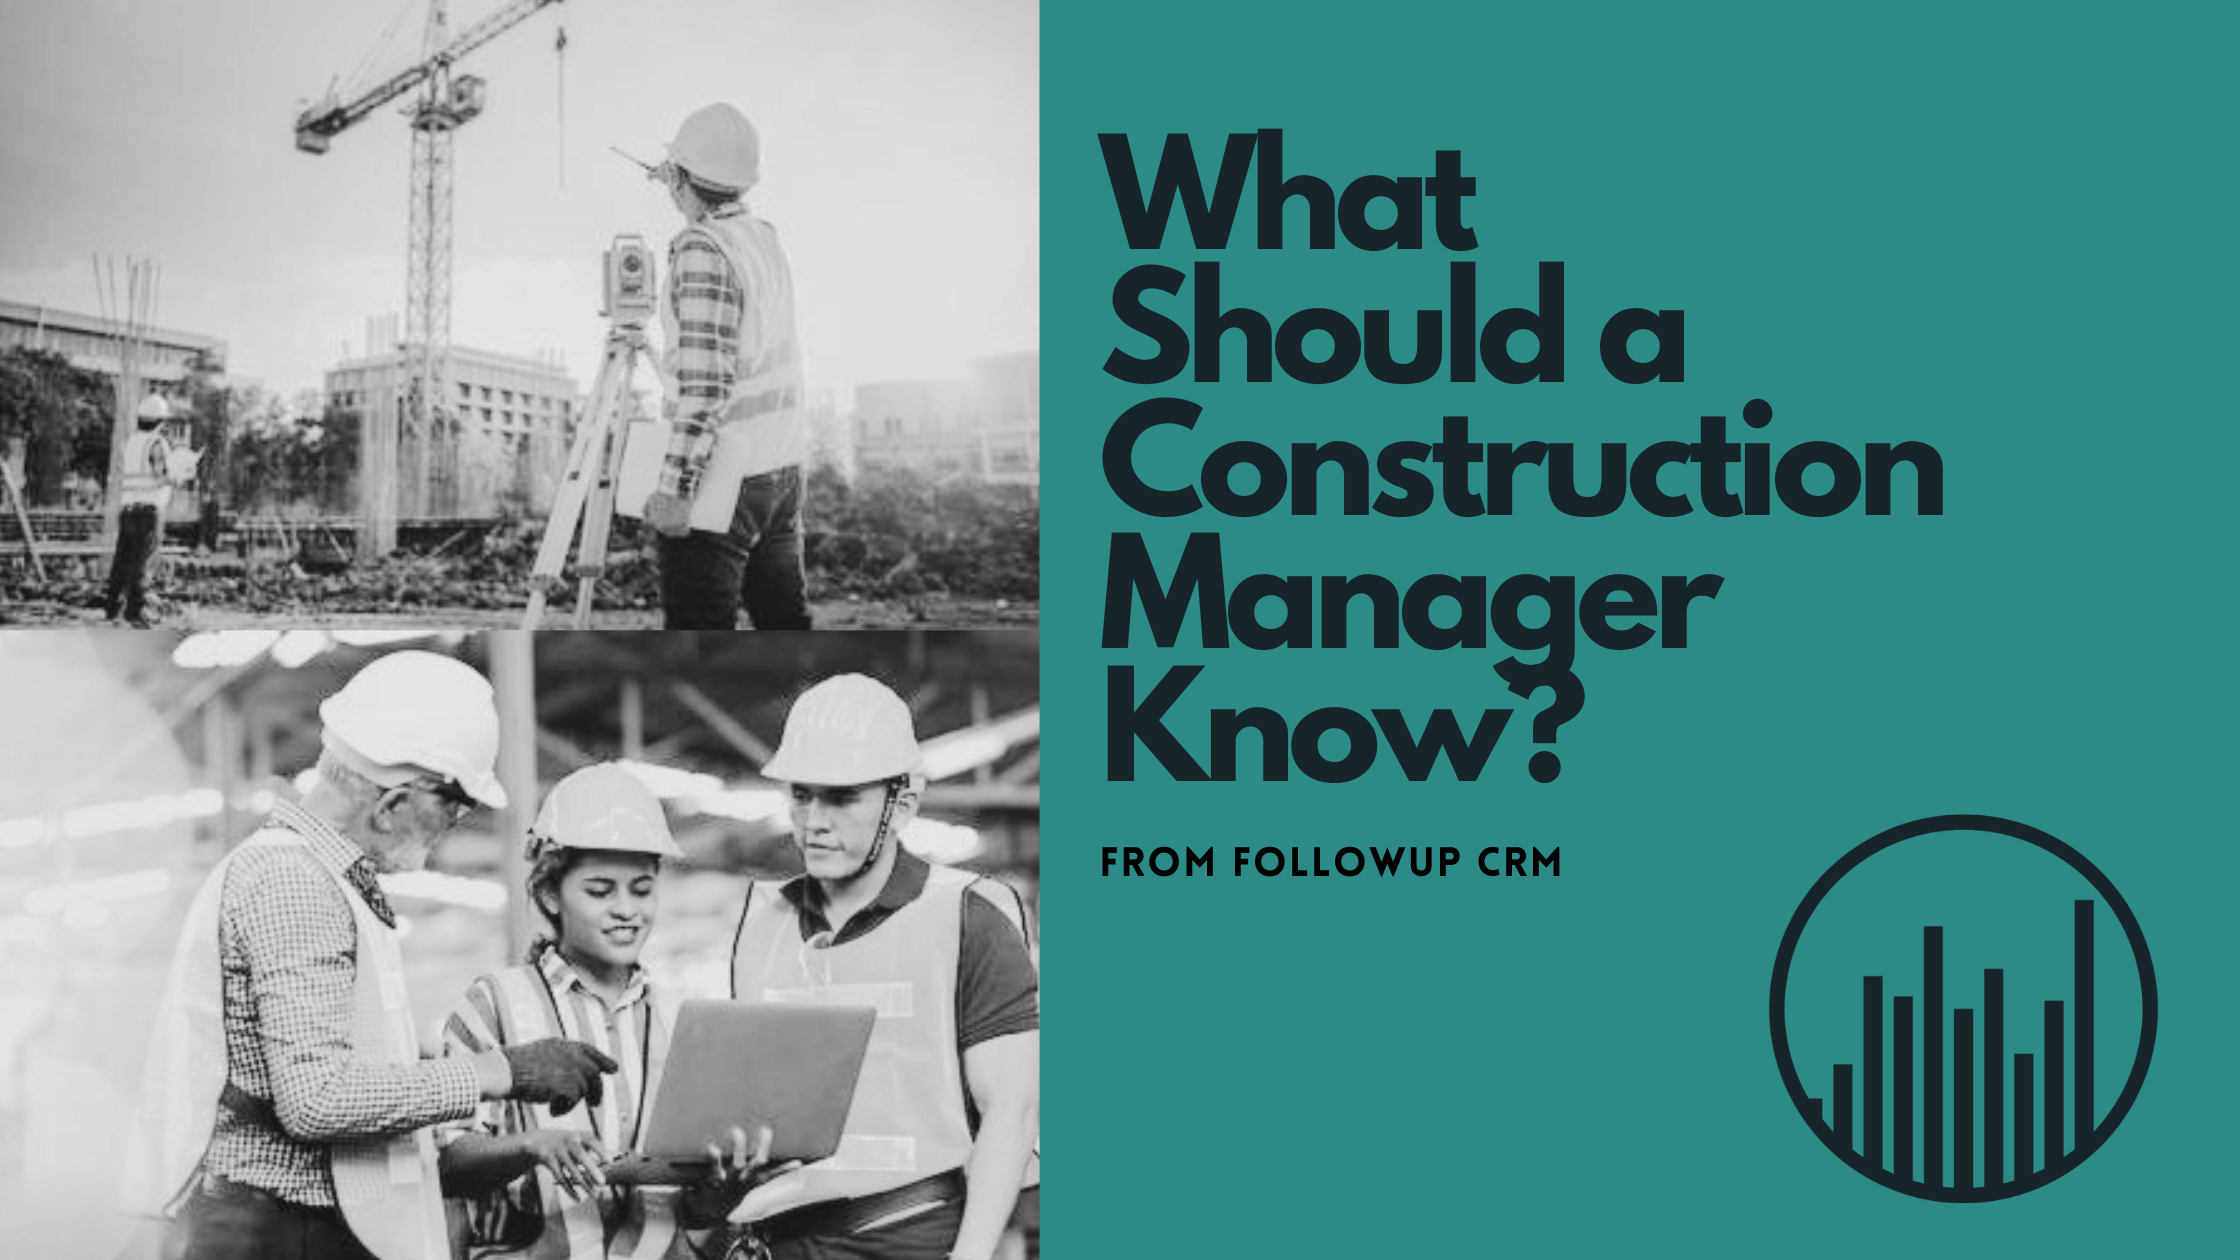 What Should a Construction Manager Know?